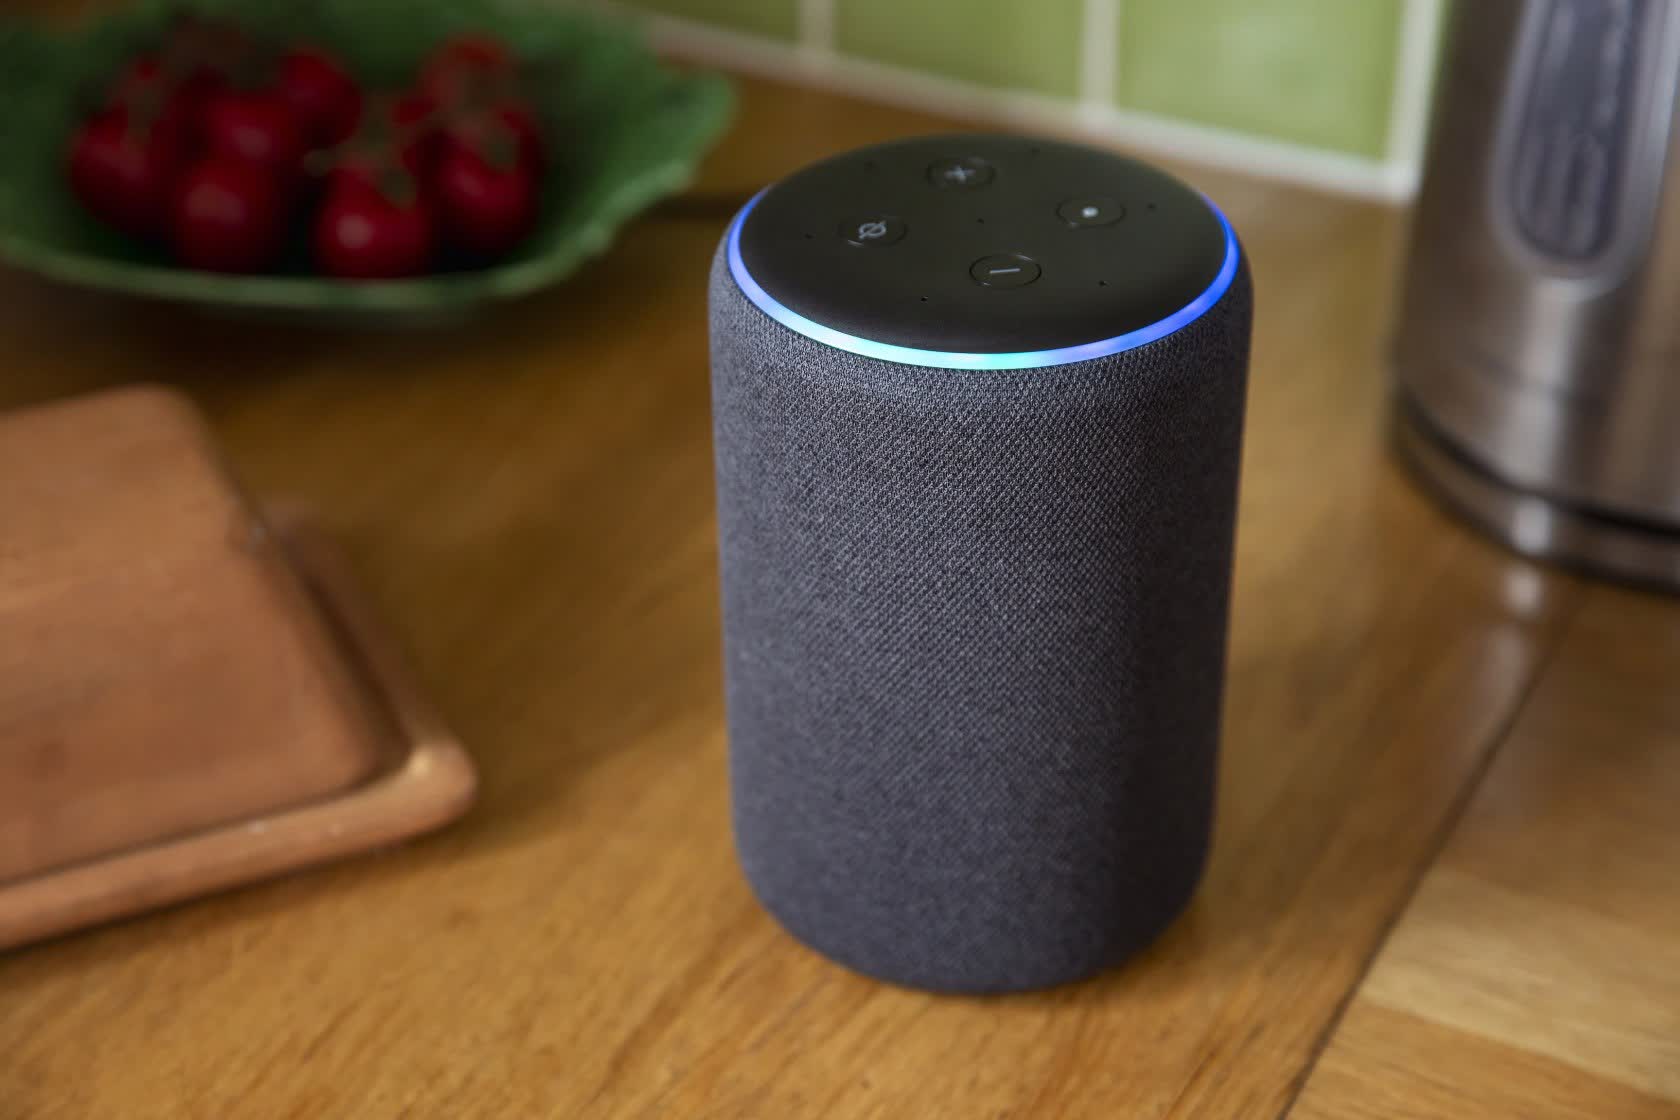 Smart devices could use AI to tell where your voice is coming from